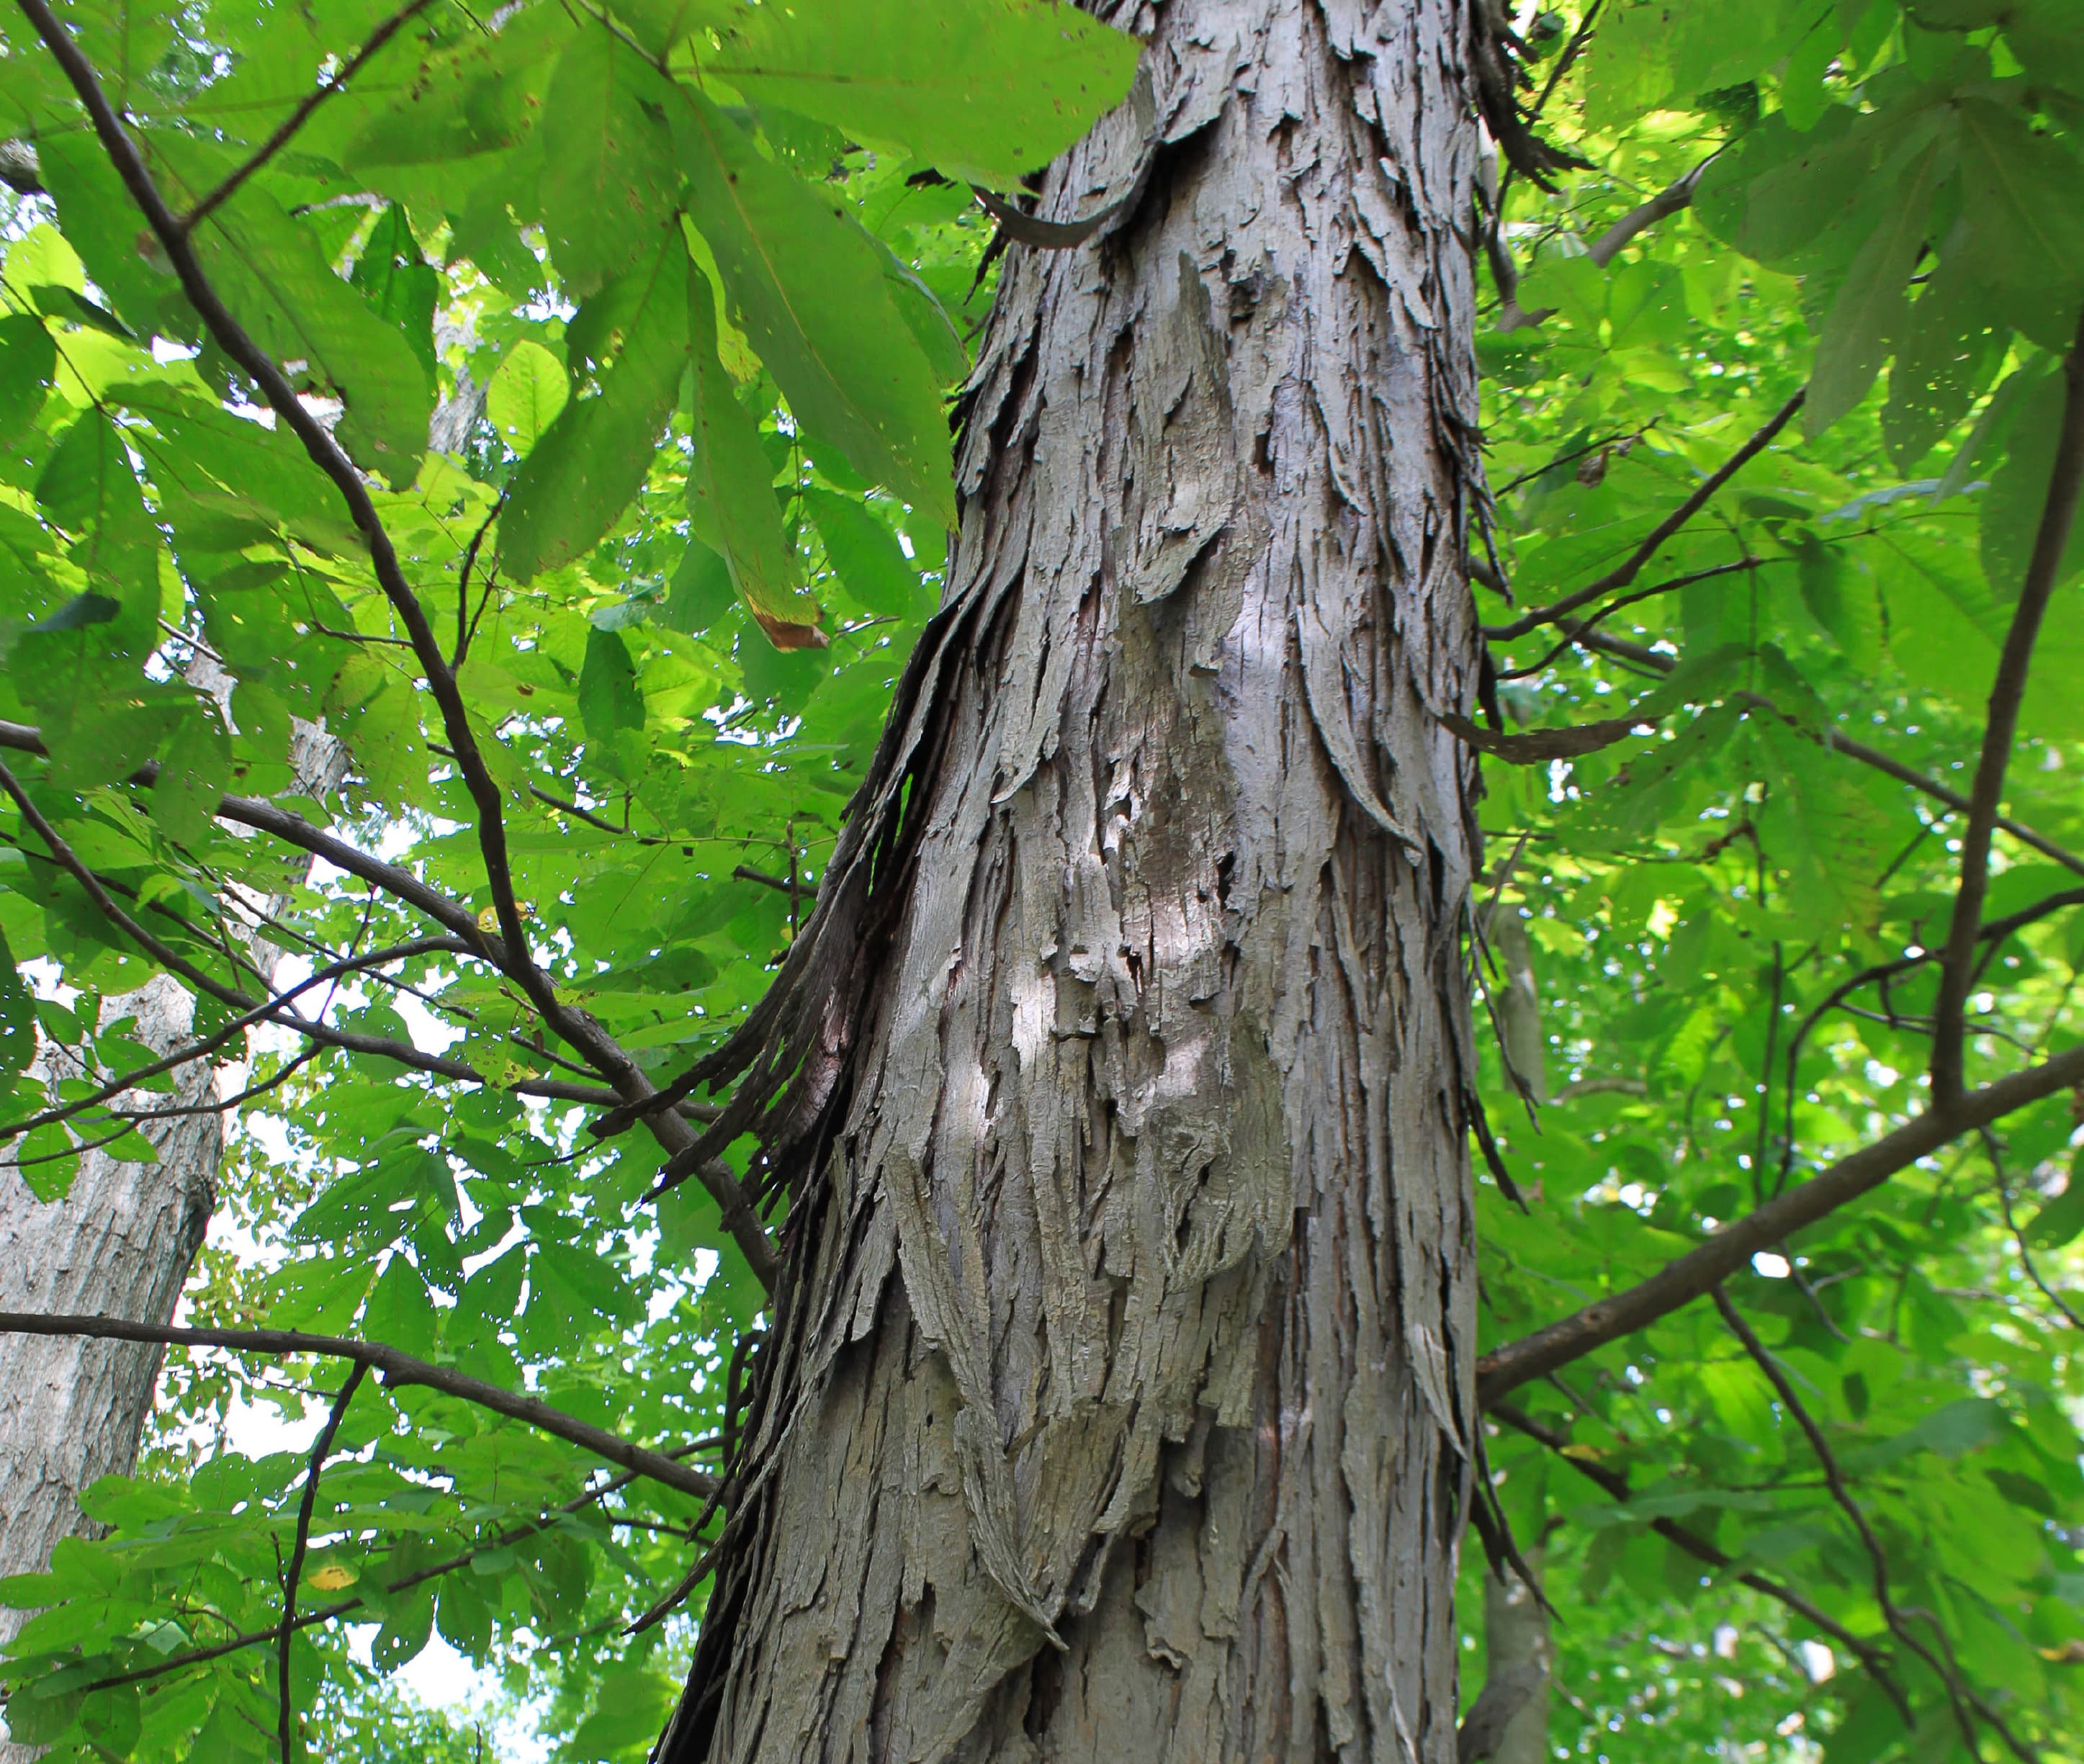 Shagbark hickory (Carya ovata) develops over time – a very exciting strain that really captures attention.